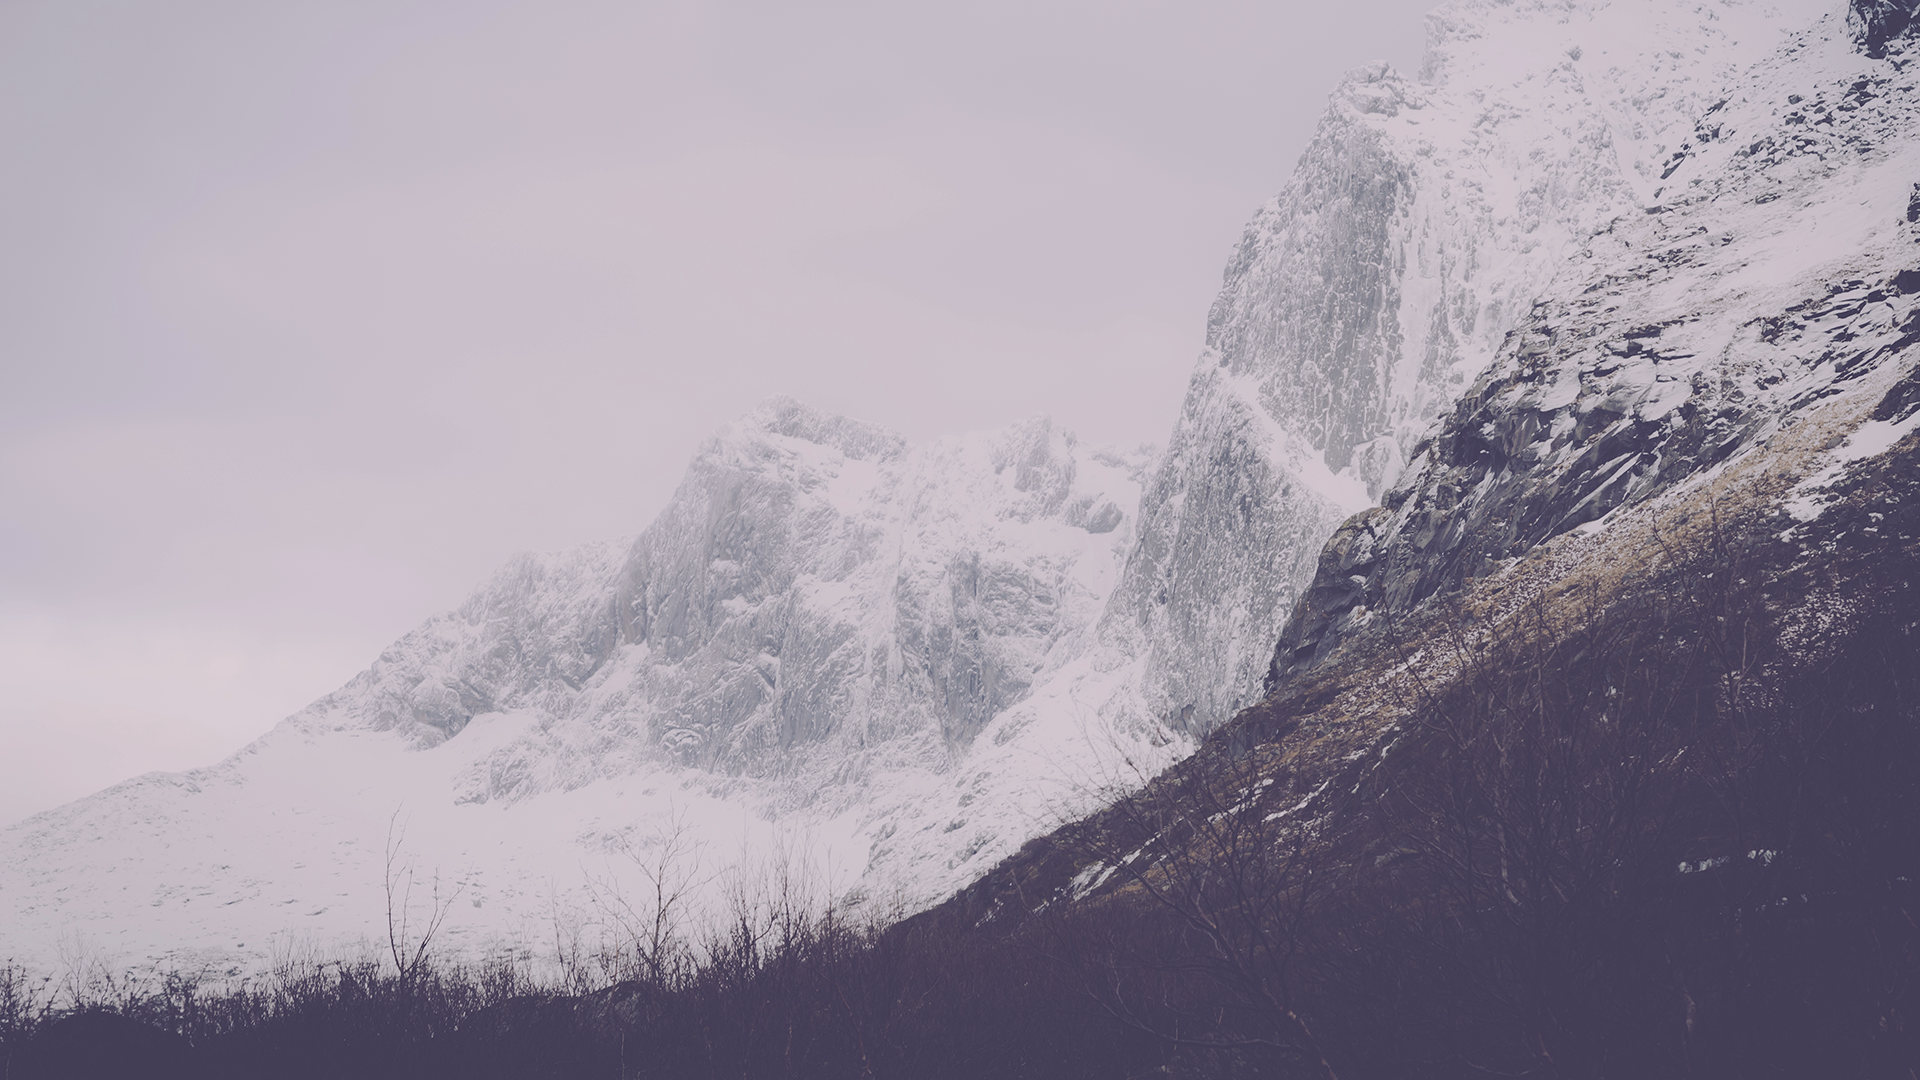 General 1920x1080 mountains landscape nature snow ice